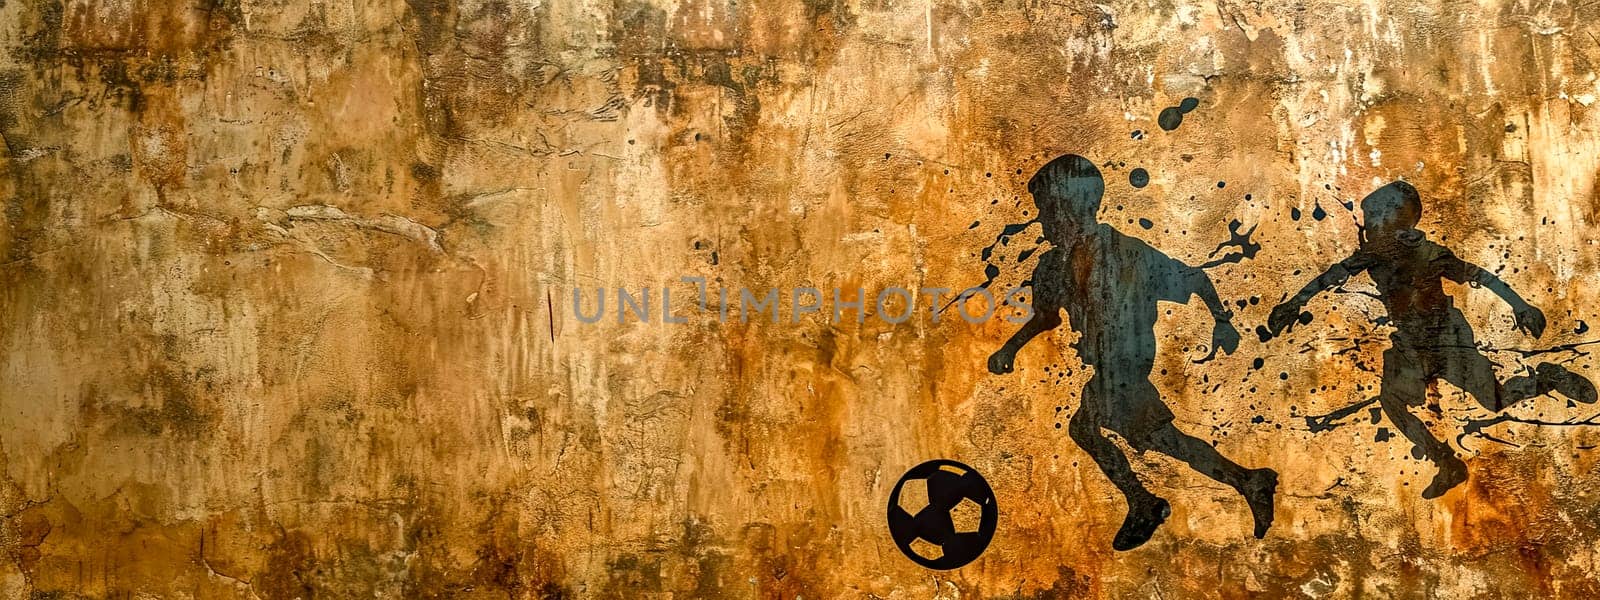 Silhouettes playing soccer on a textured, ancient wall-like background, copy space